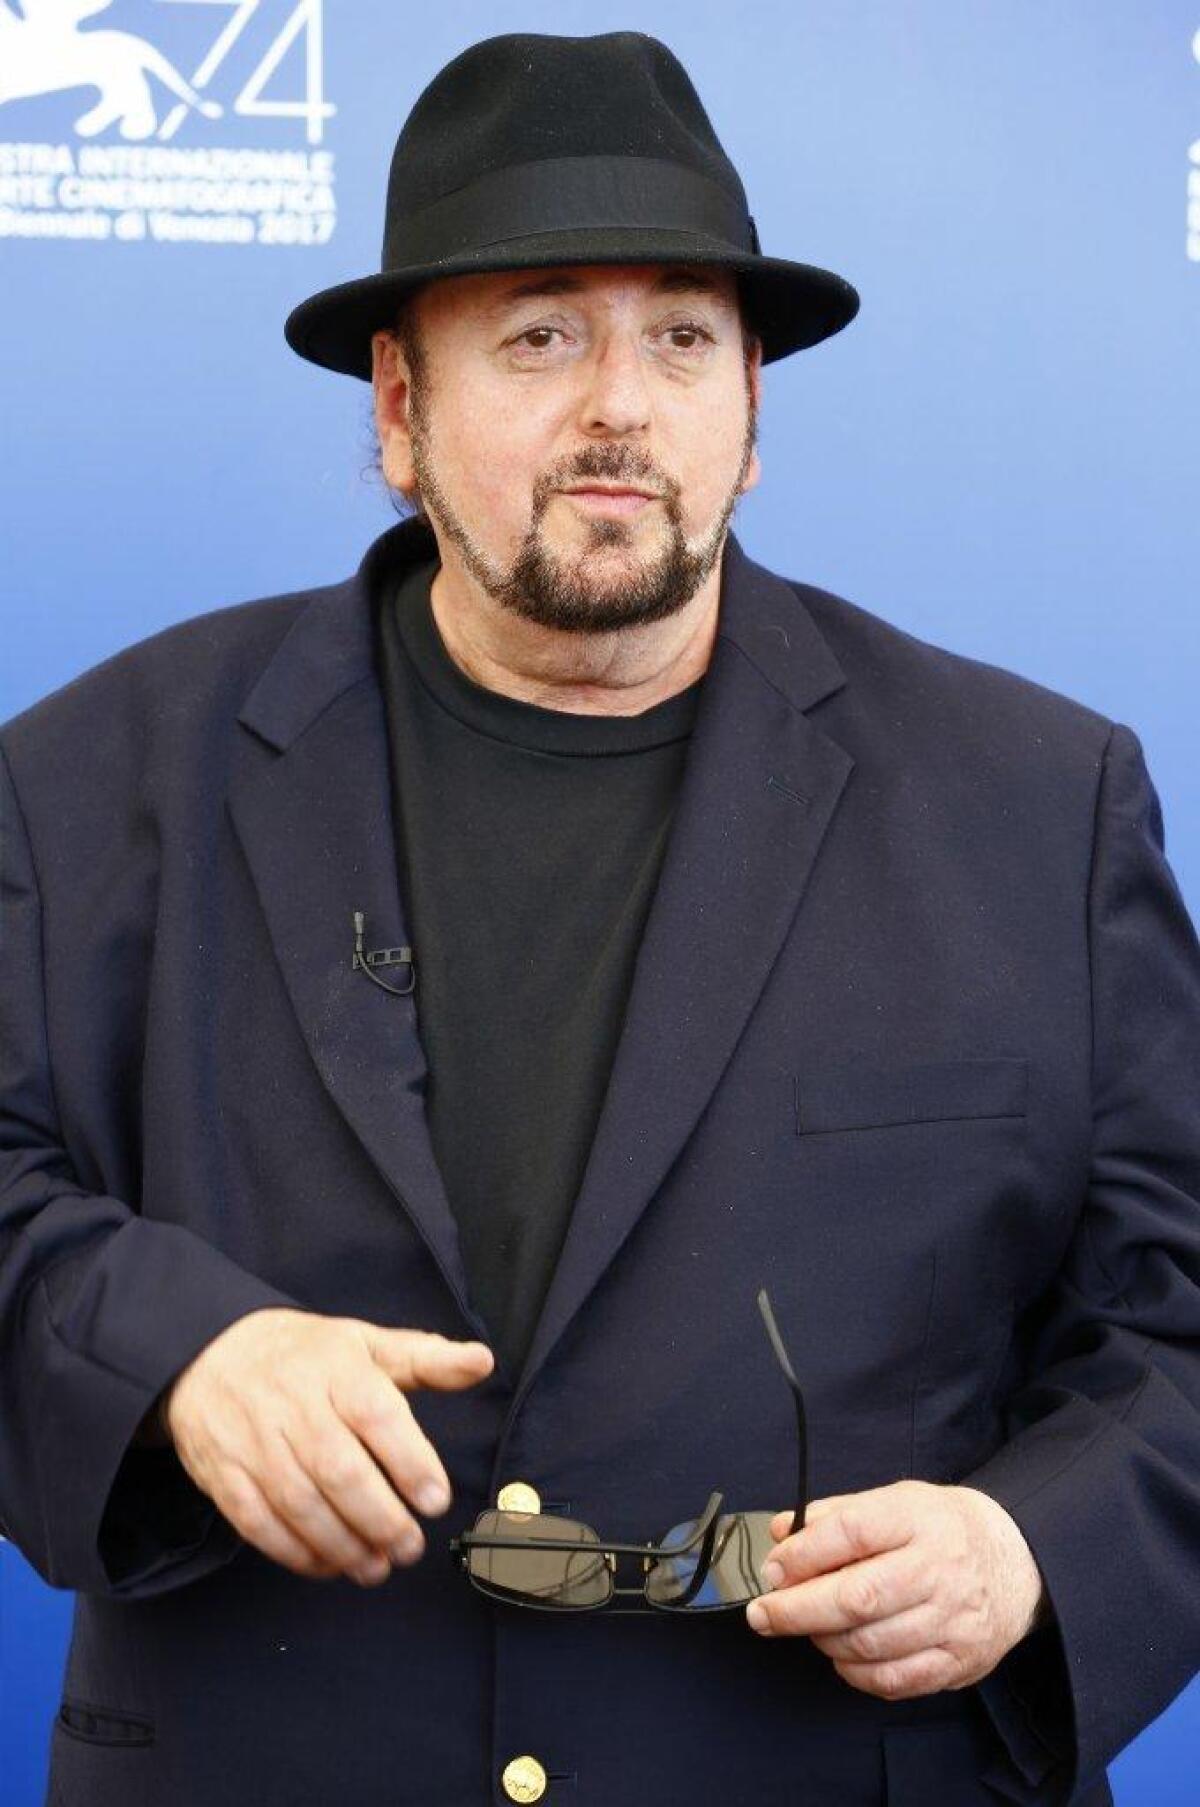 James Toback is accused of sexually harassing hundreds of women.